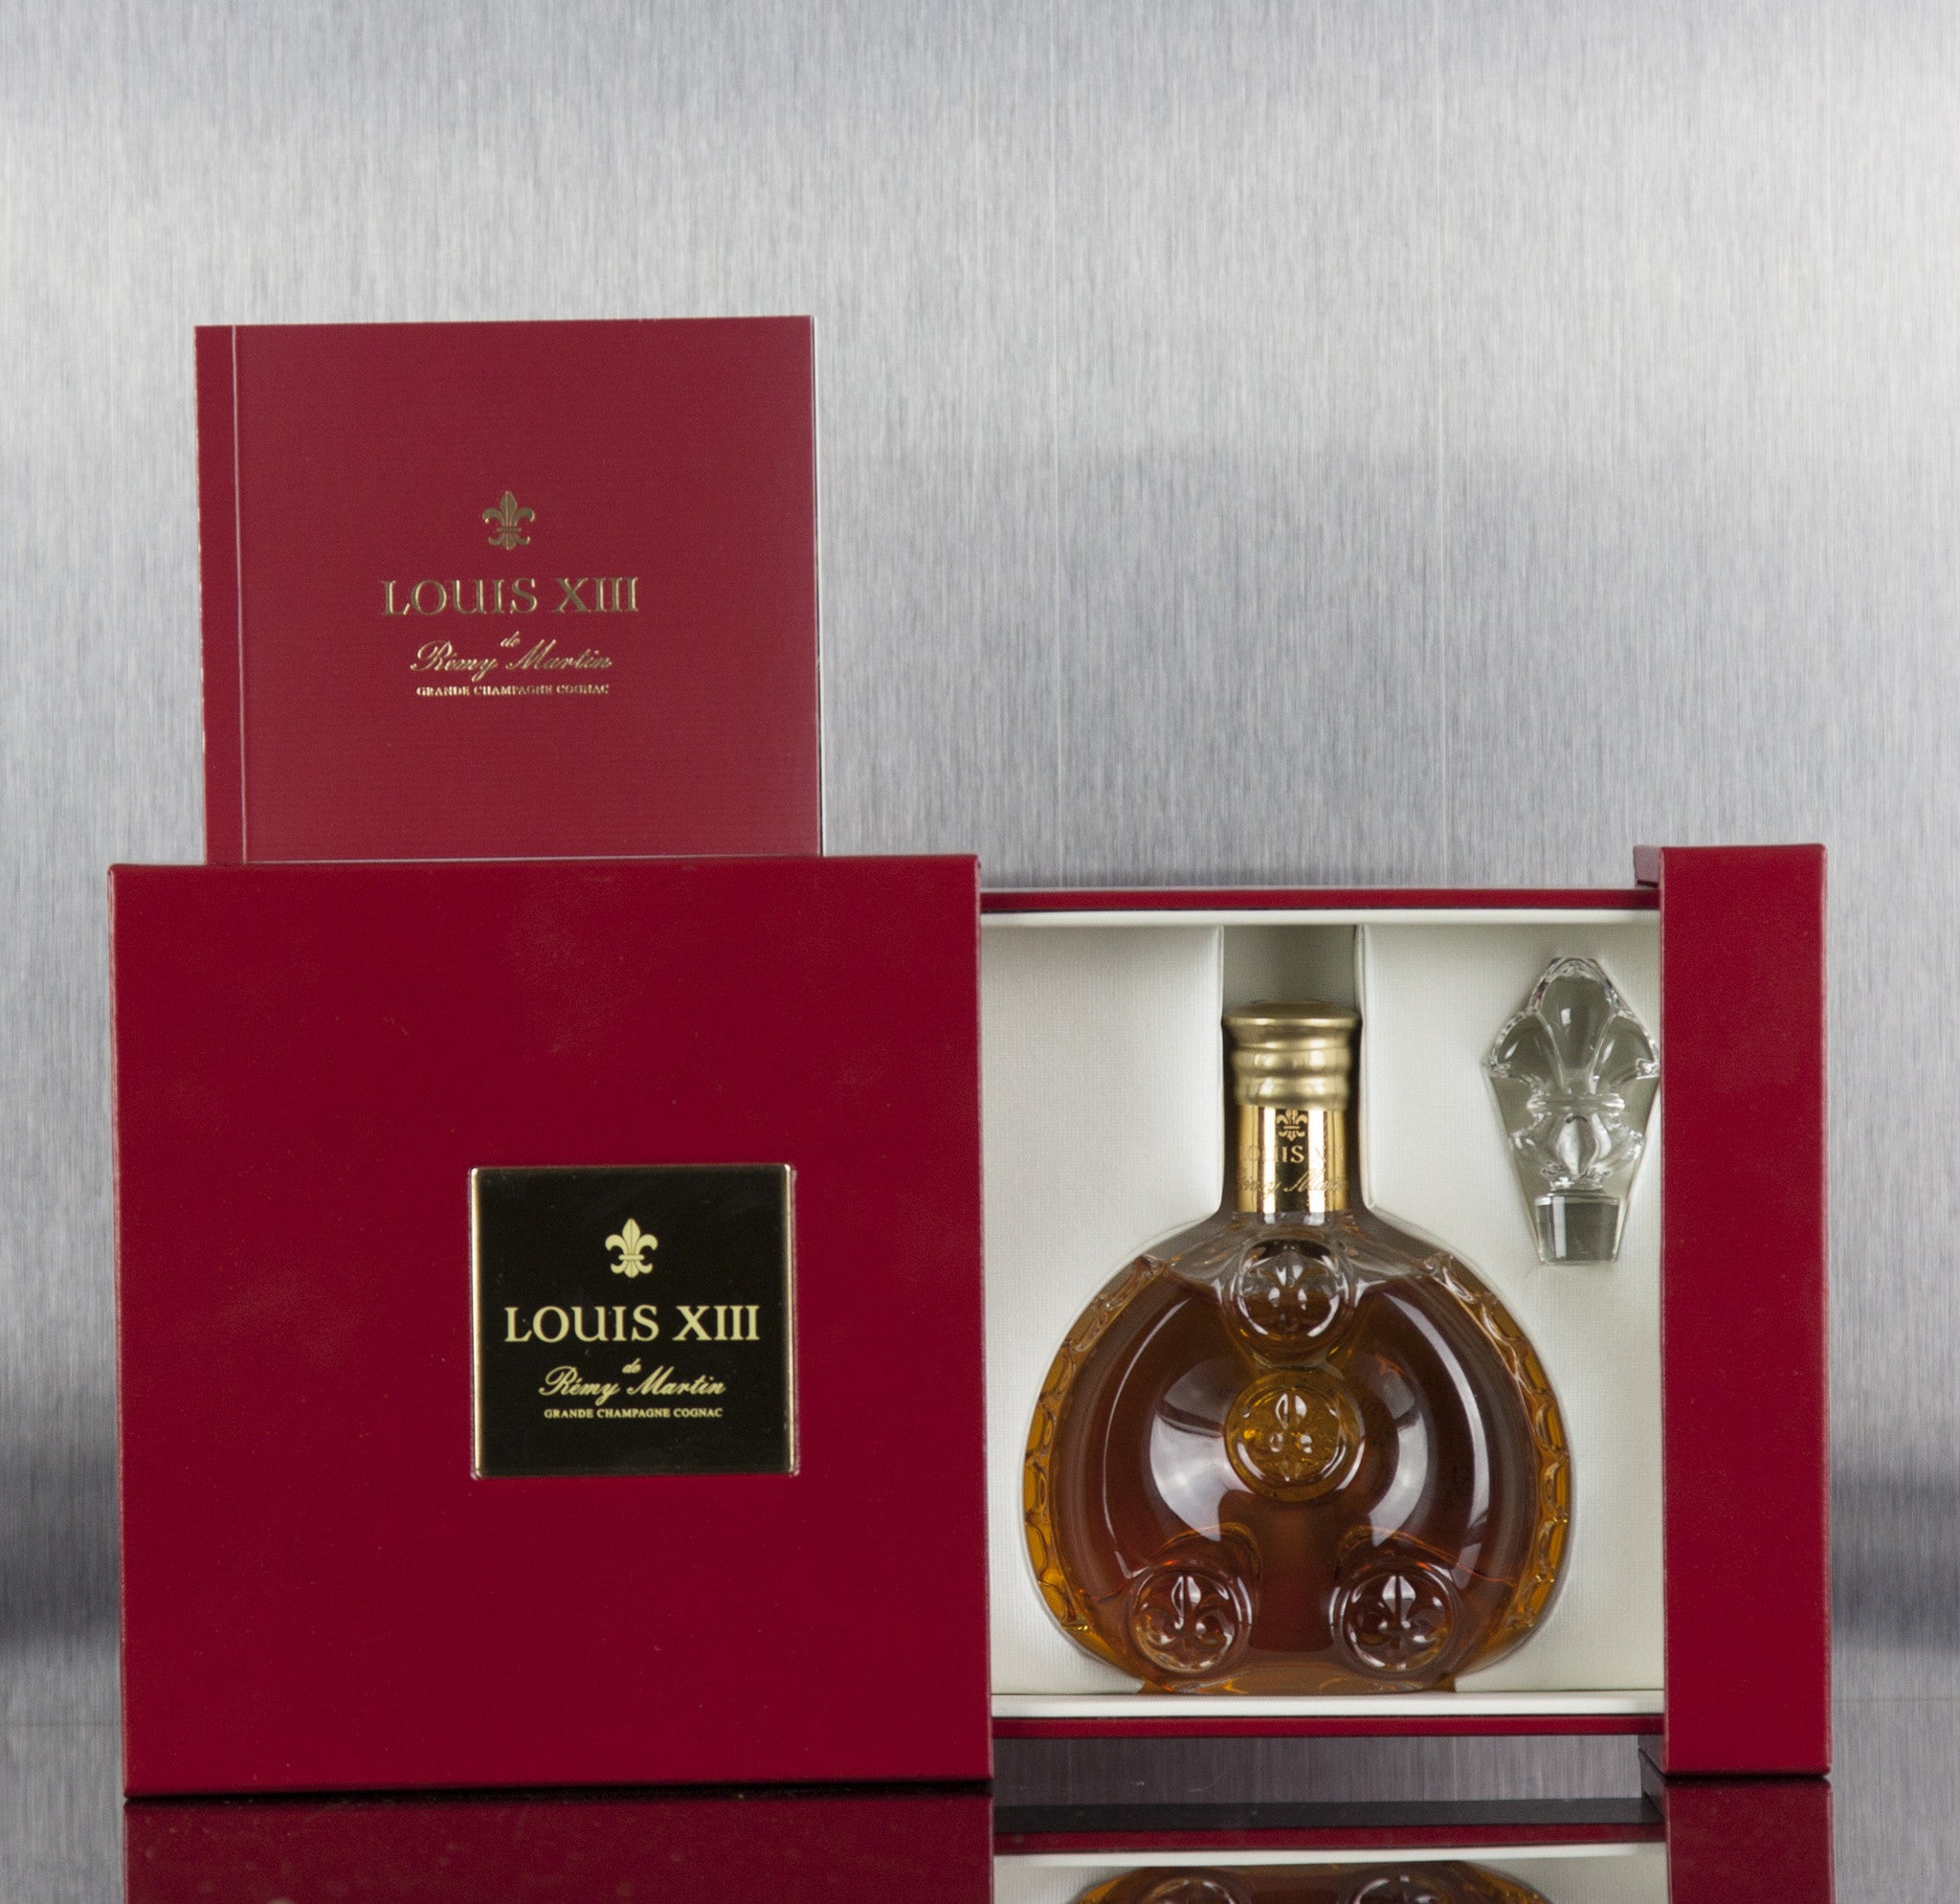 remy martin louis xiii